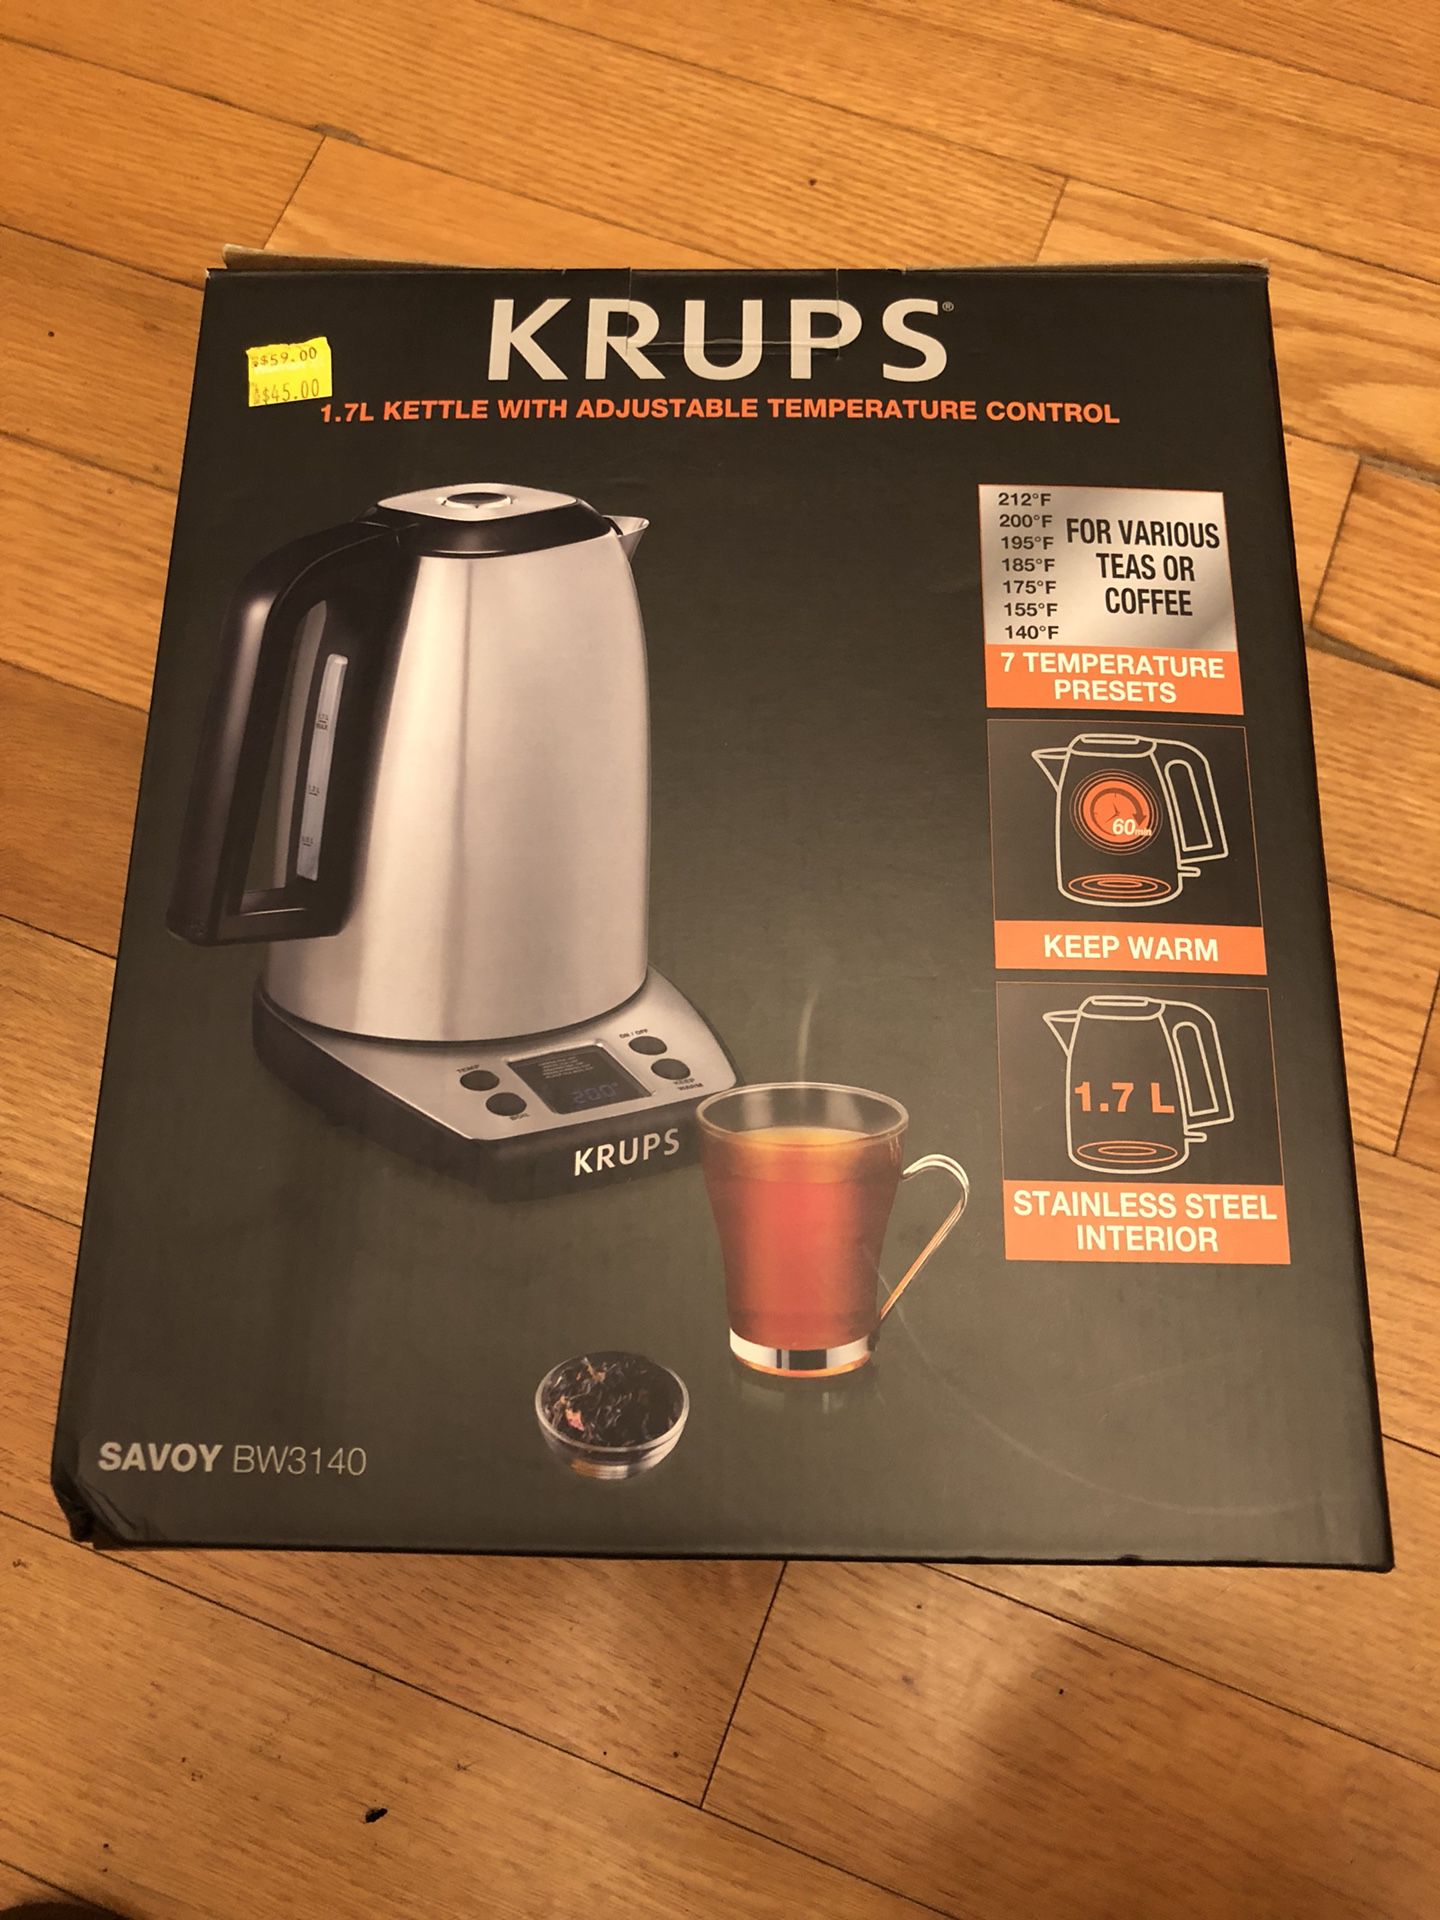 KRUPS BW3140 SAVOY Adjustable Temperature LCD Display Electronic Kettle  Brushed Stainless Steel Housing, 1.7-Liter, Silver for Sale in Eden  Prairie, MN - OfferUp